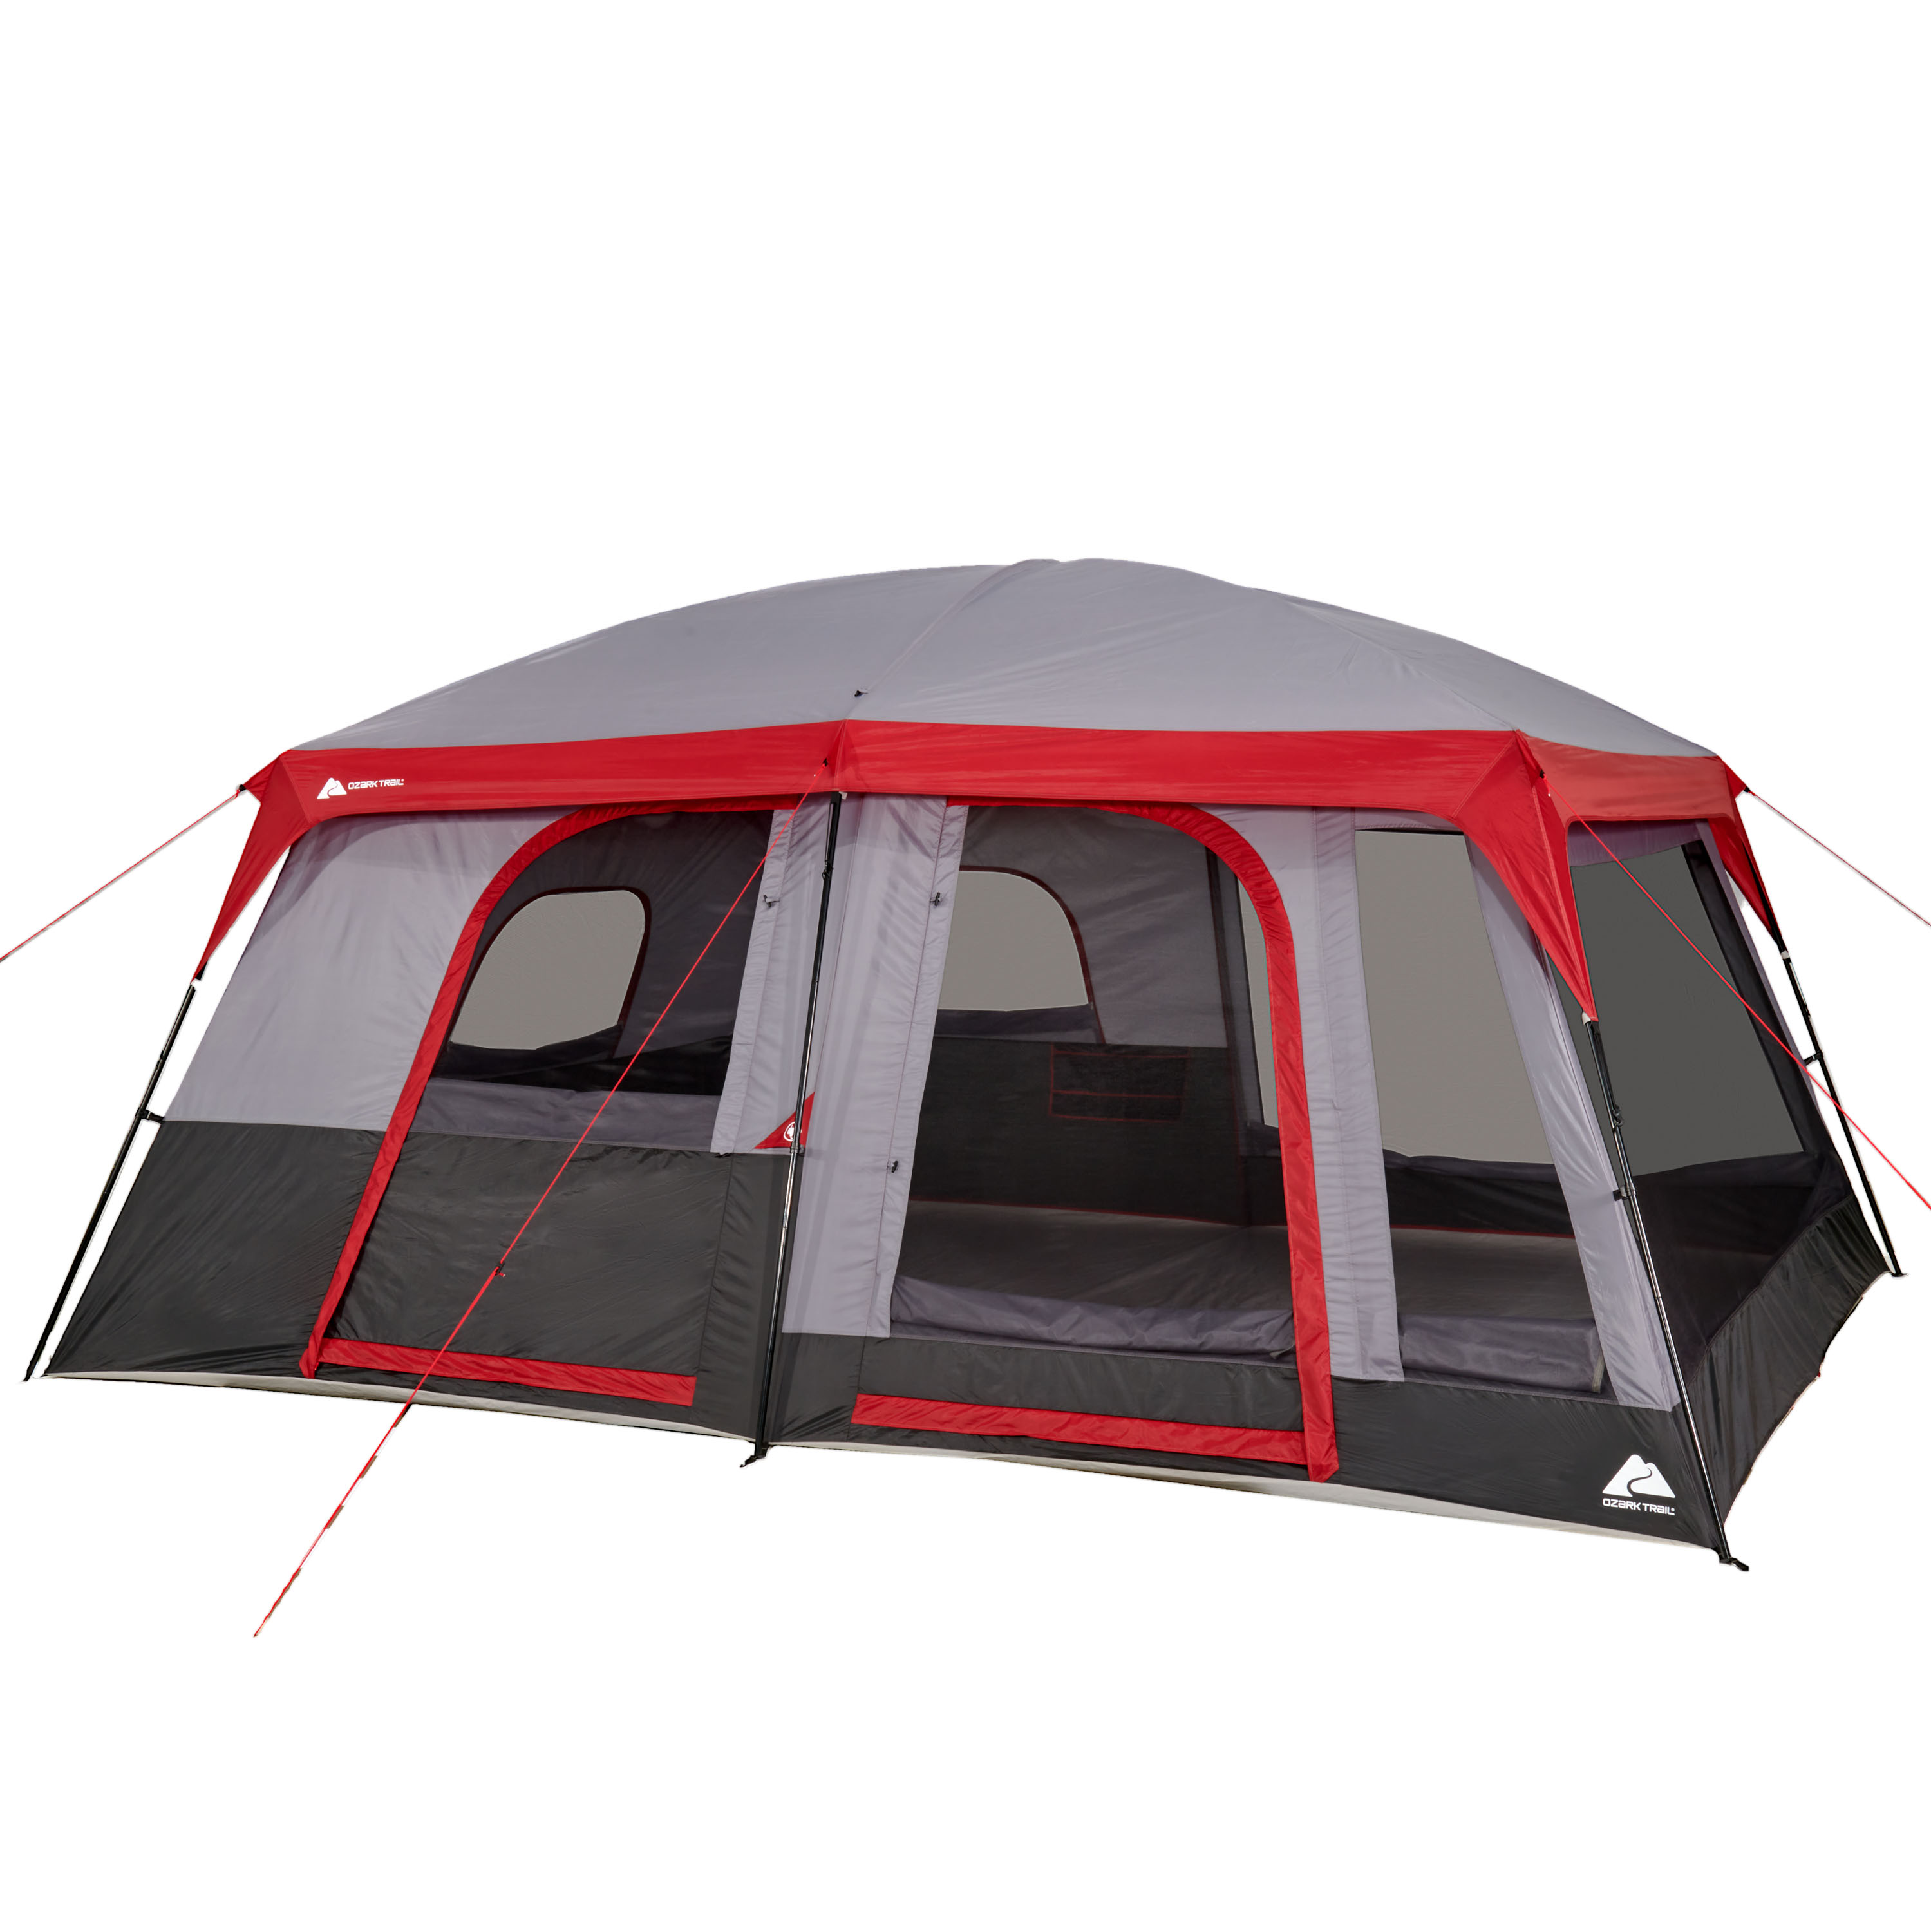 Ozark Trail 12-Person Cabin Tent, with Convertible Screen Room - image 1 of 20